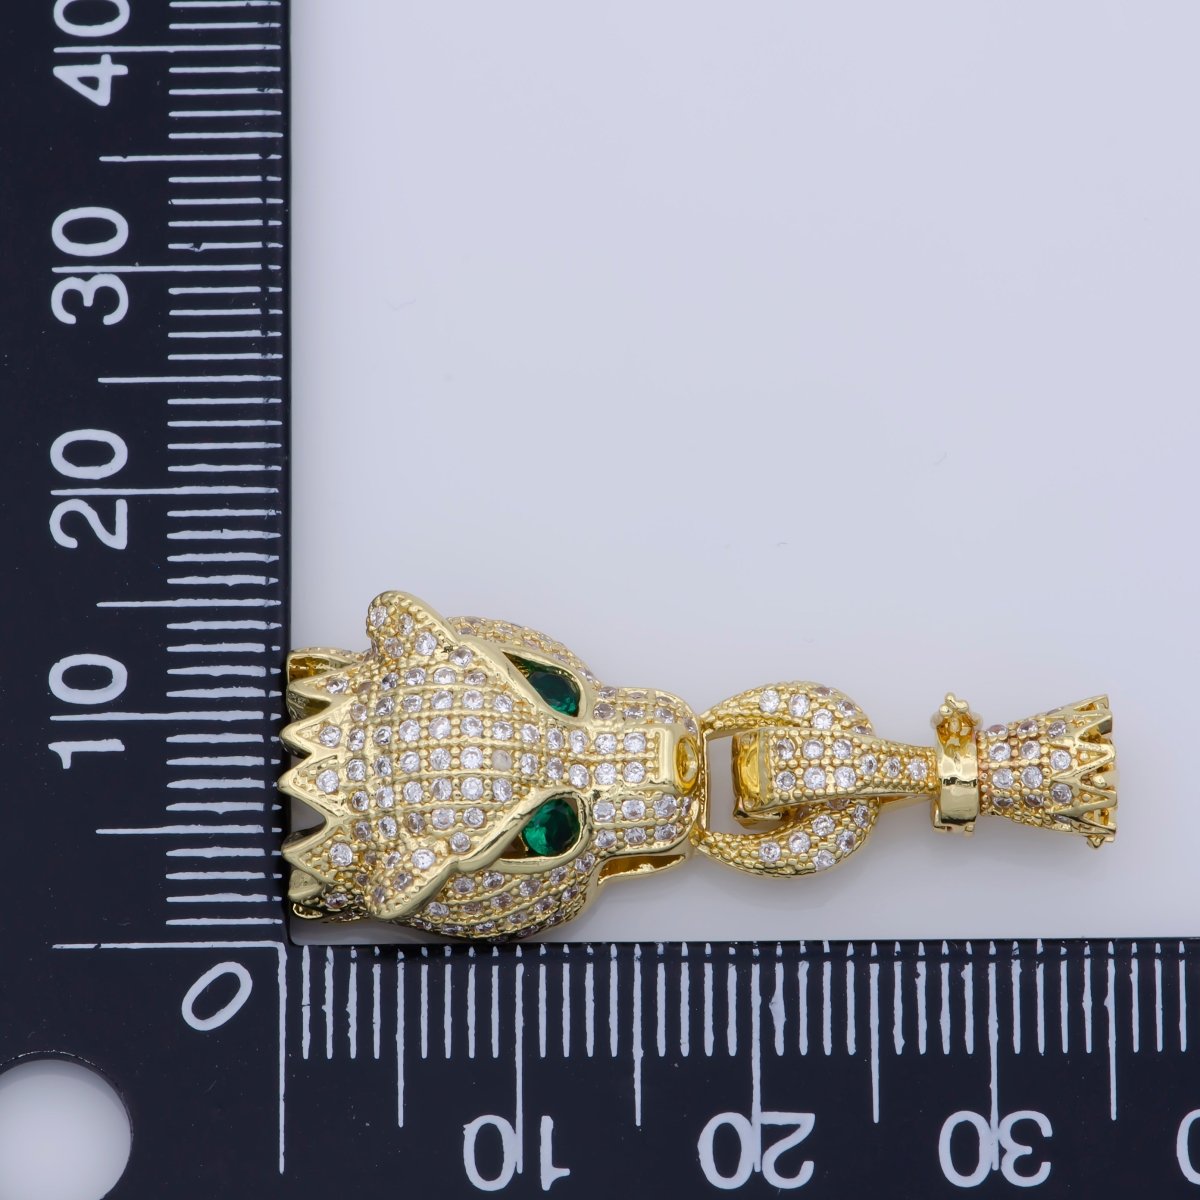 Micro Pave Leopard Clasp Buckle tassel head cap Cubic Panther leopard Animal Clasp for Beading Bracelet Necklace in 24k Gold Filled F-344 - DLUXCA